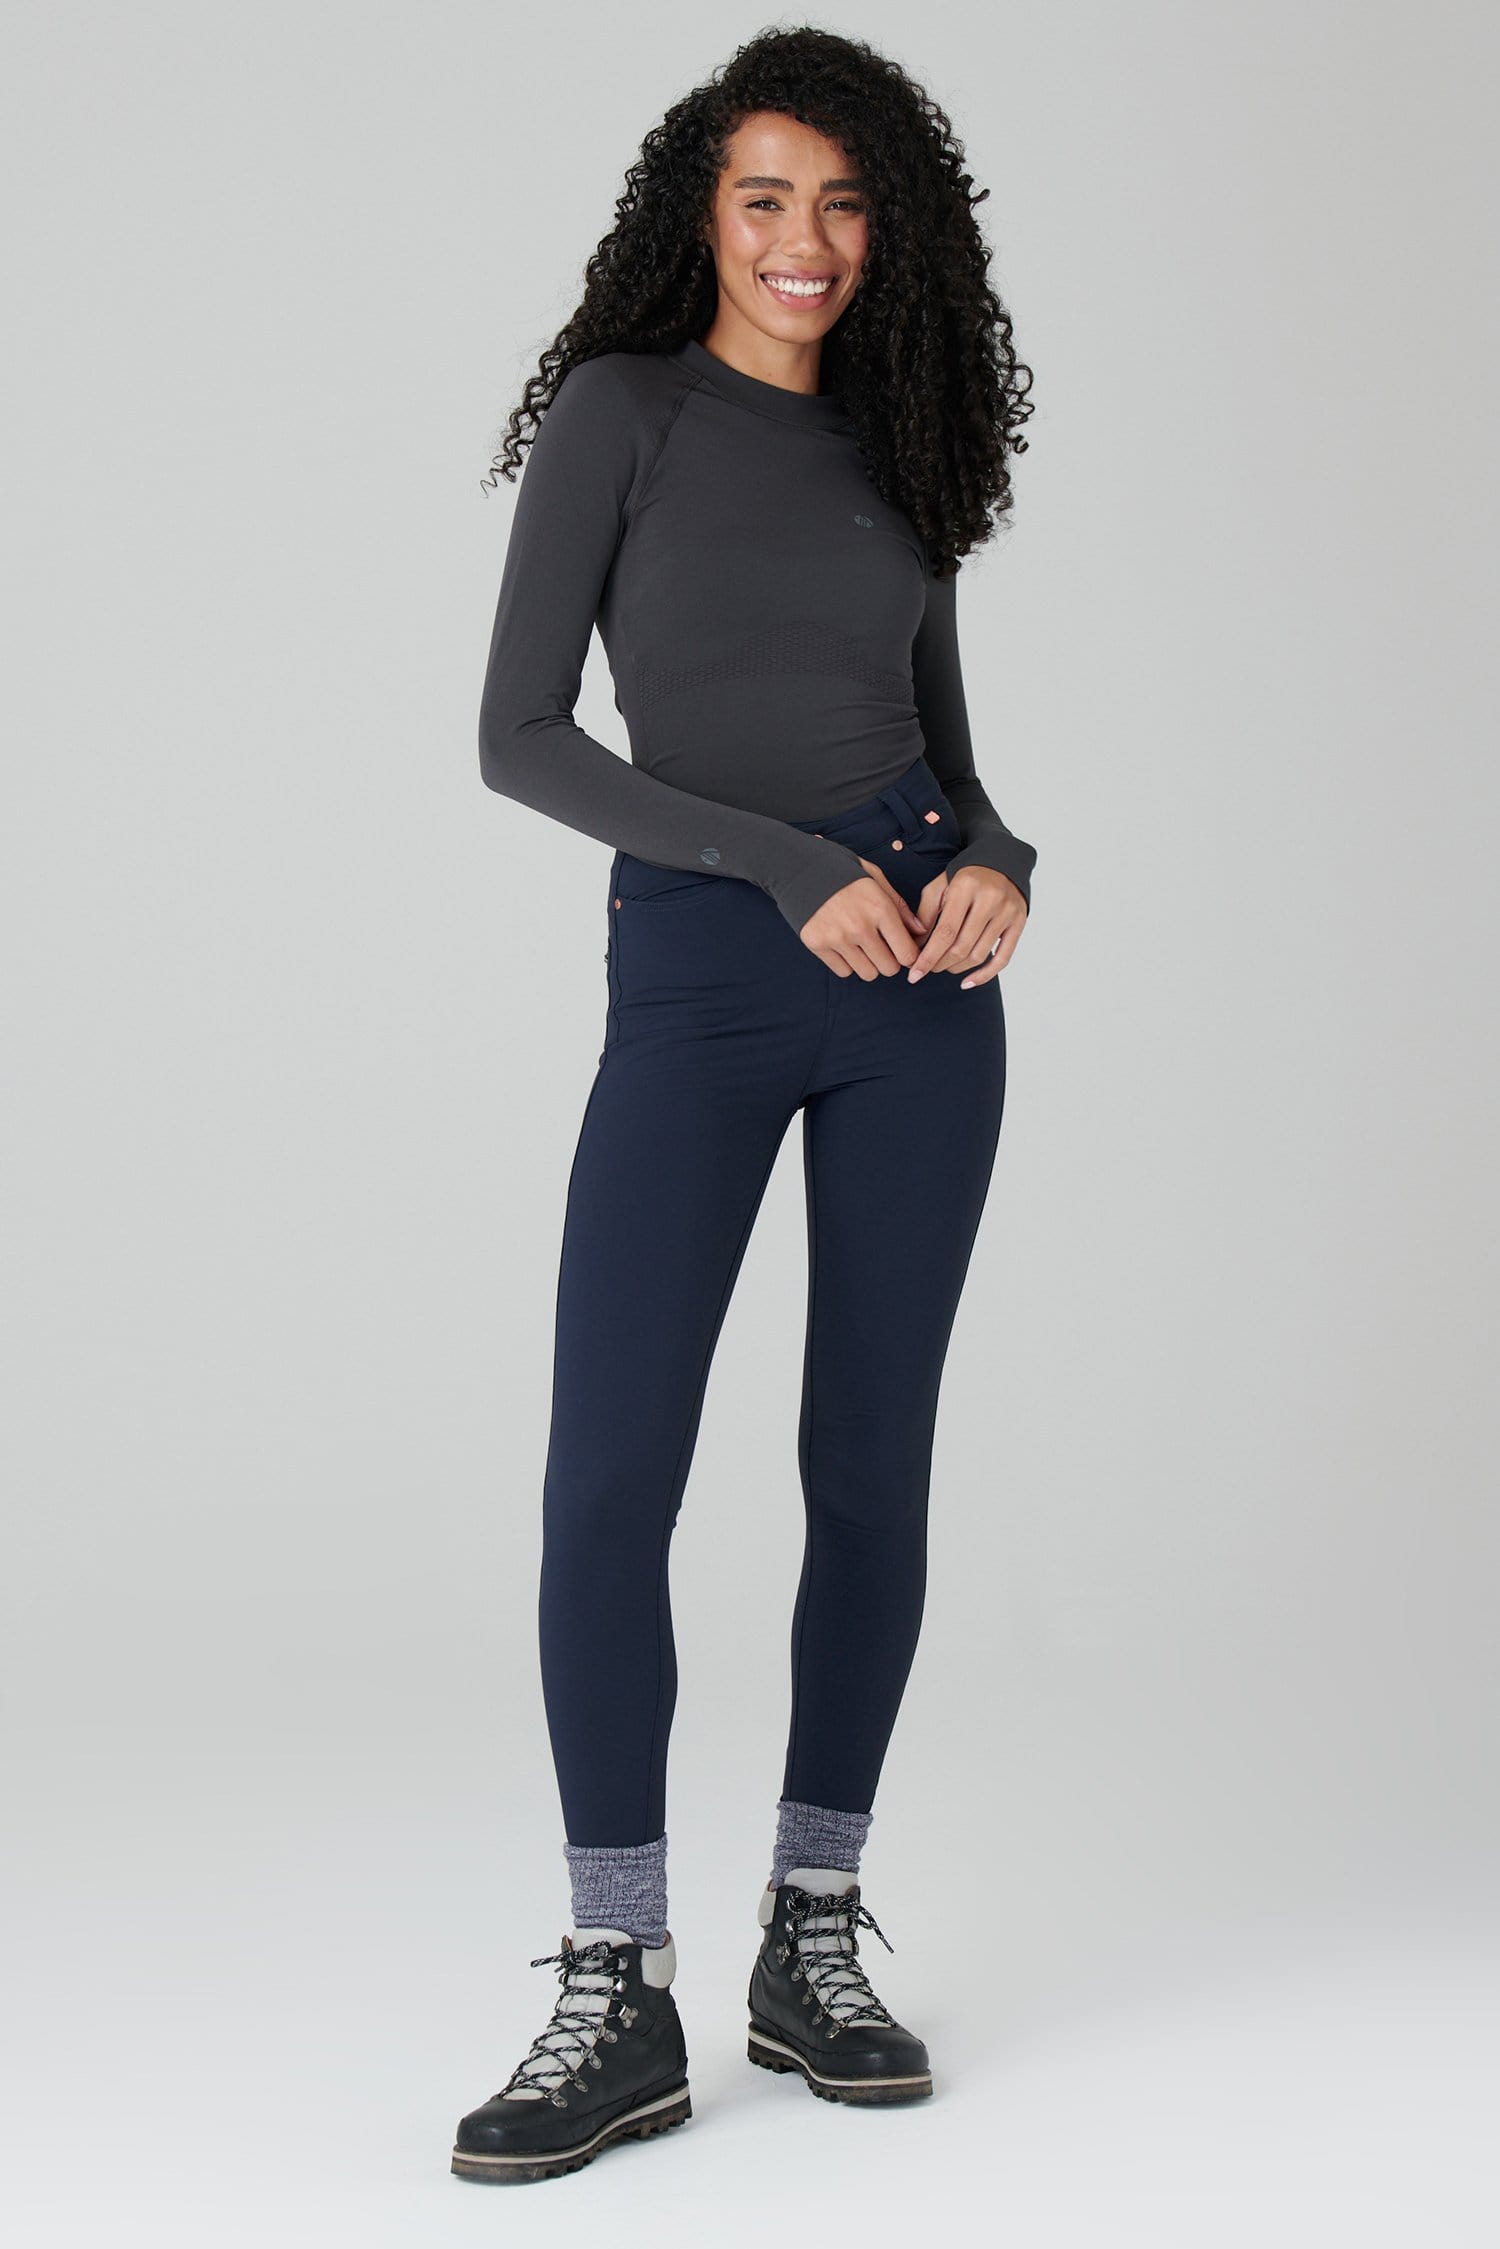 Thermal Skinny Outdoor Trousers Deep Navy Fleece Lined